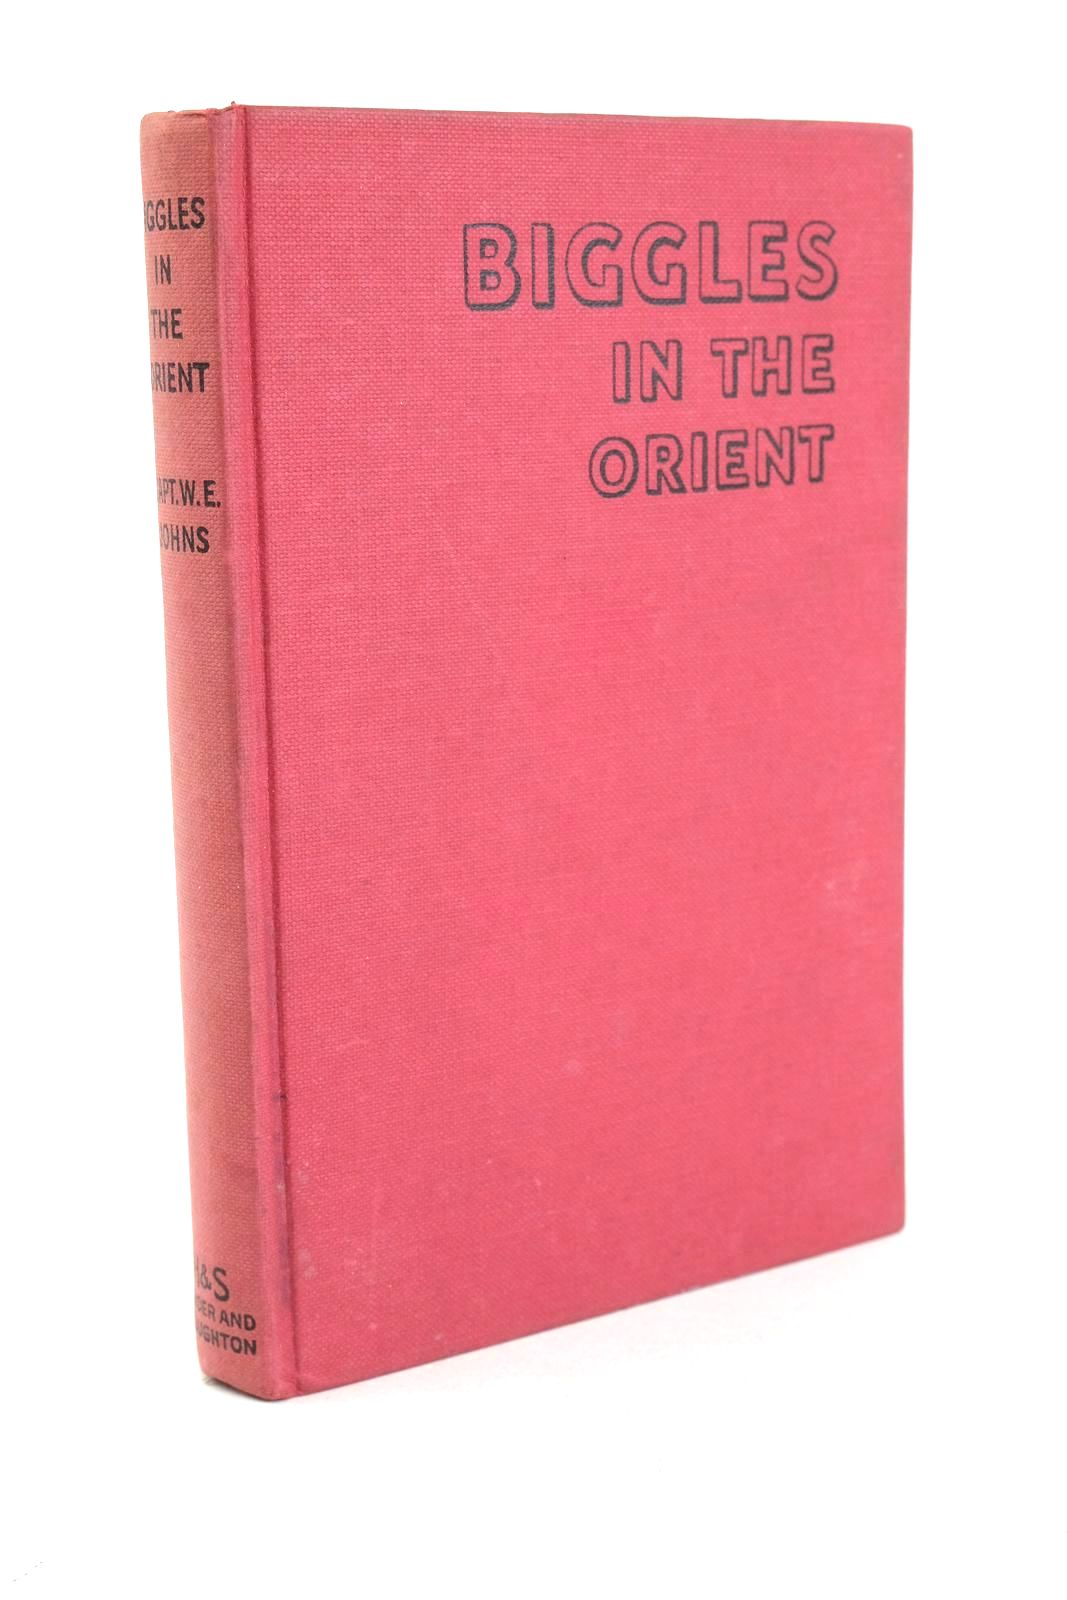 Photo of BIGGLES IN THE ORIENT written by Johns, W.E. illustrated by Stead,  published by Hodder &amp; Stoughton (STOCK CODE: 1327208)  for sale by Stella & Rose's Books